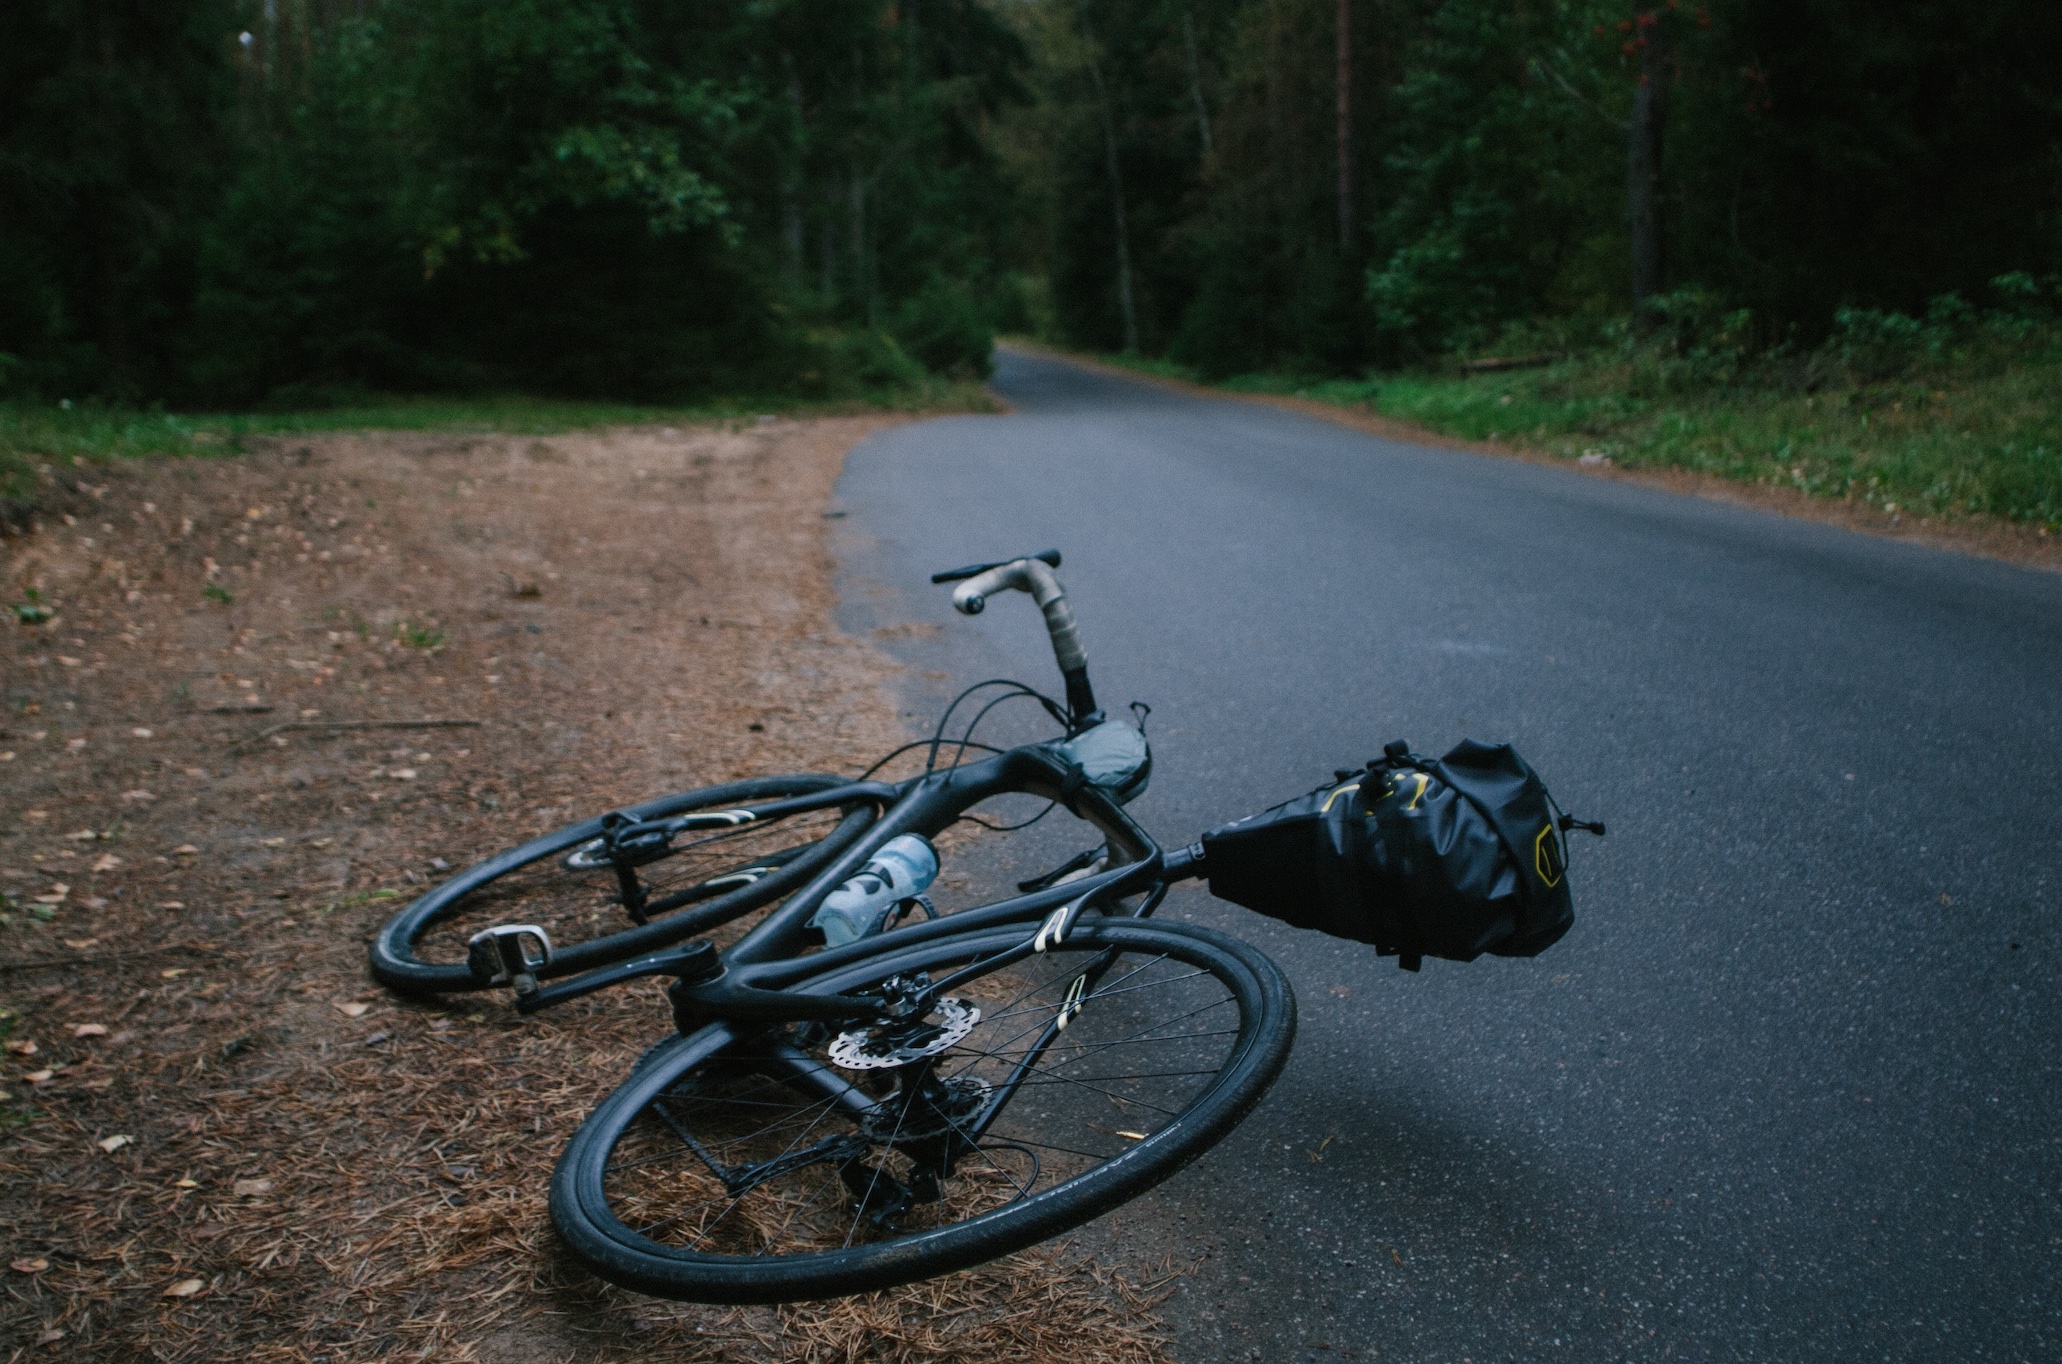 Bike at the side of the road; image by Dmitrii Vaccinium, via Unsplash.com.